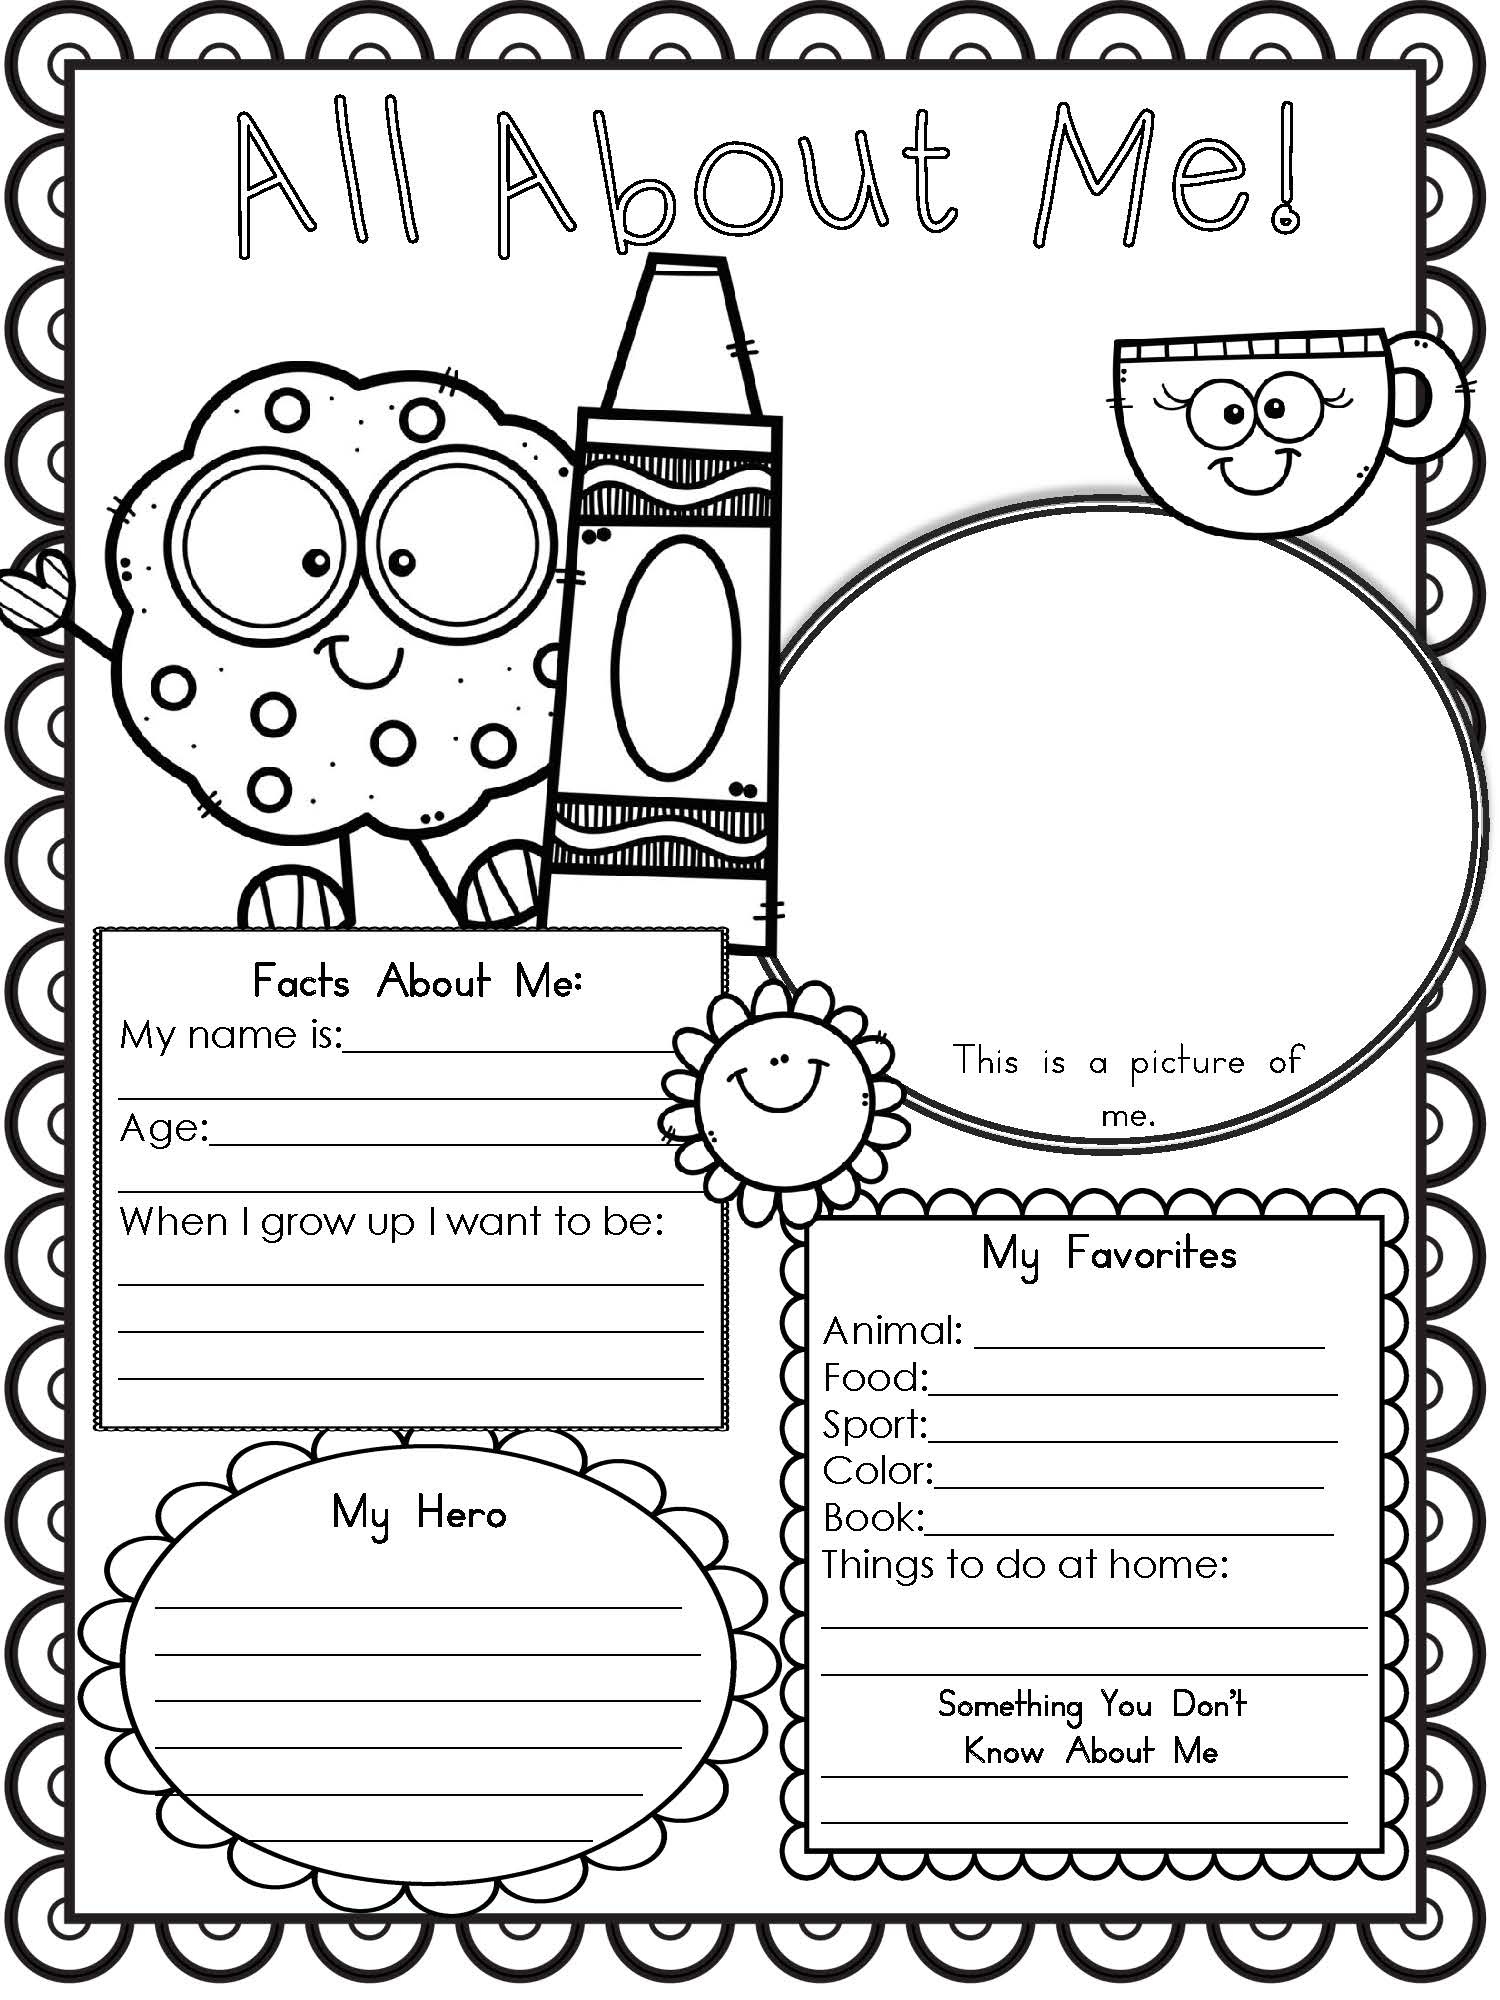 Free Printable All About Me Worksheet - Modern Homeschool Family - All About Me Free Printable